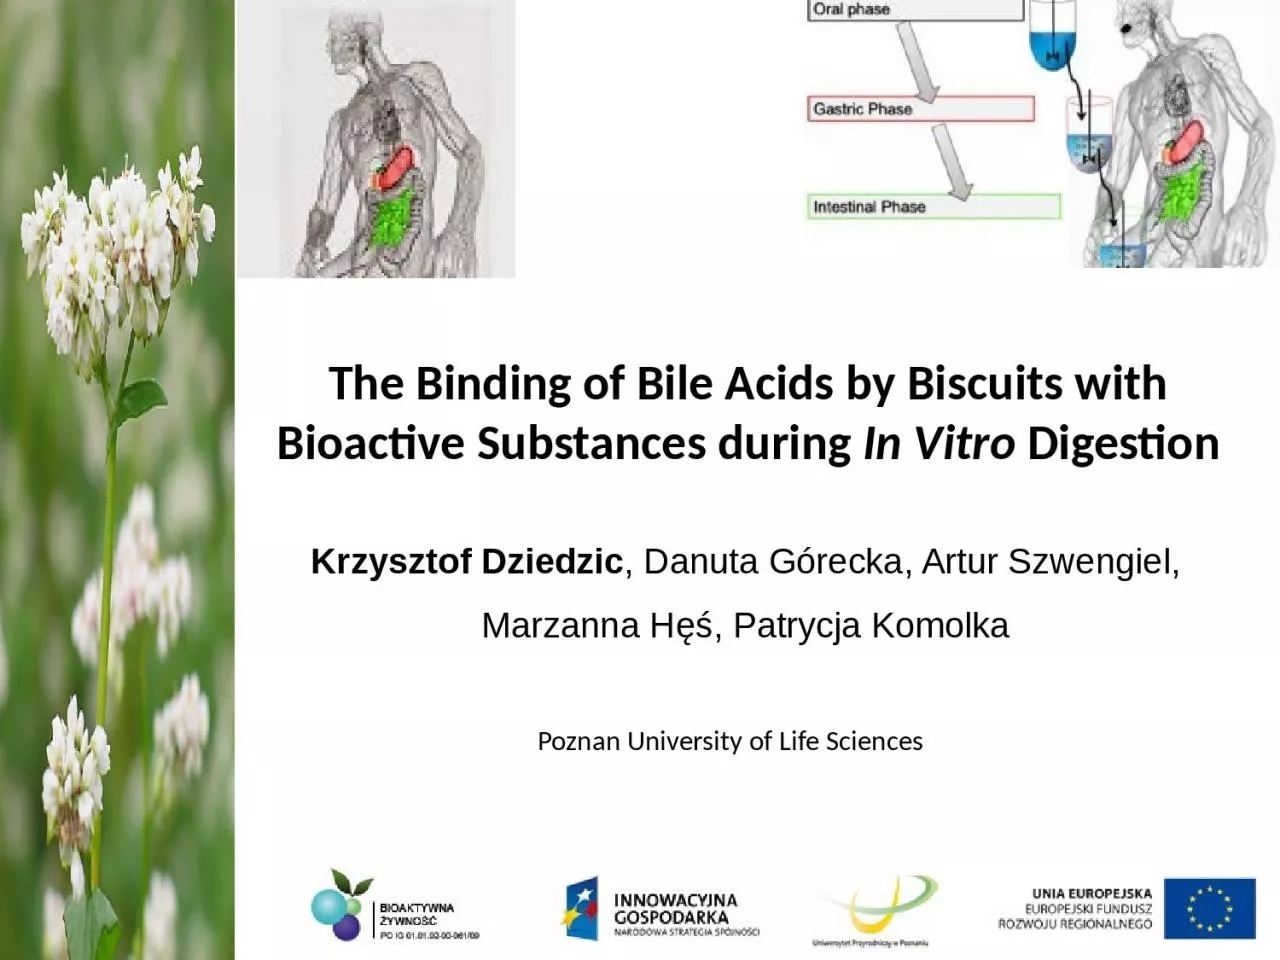 The Binding of Bile Acids by Biscuits with Bioactive Substances during